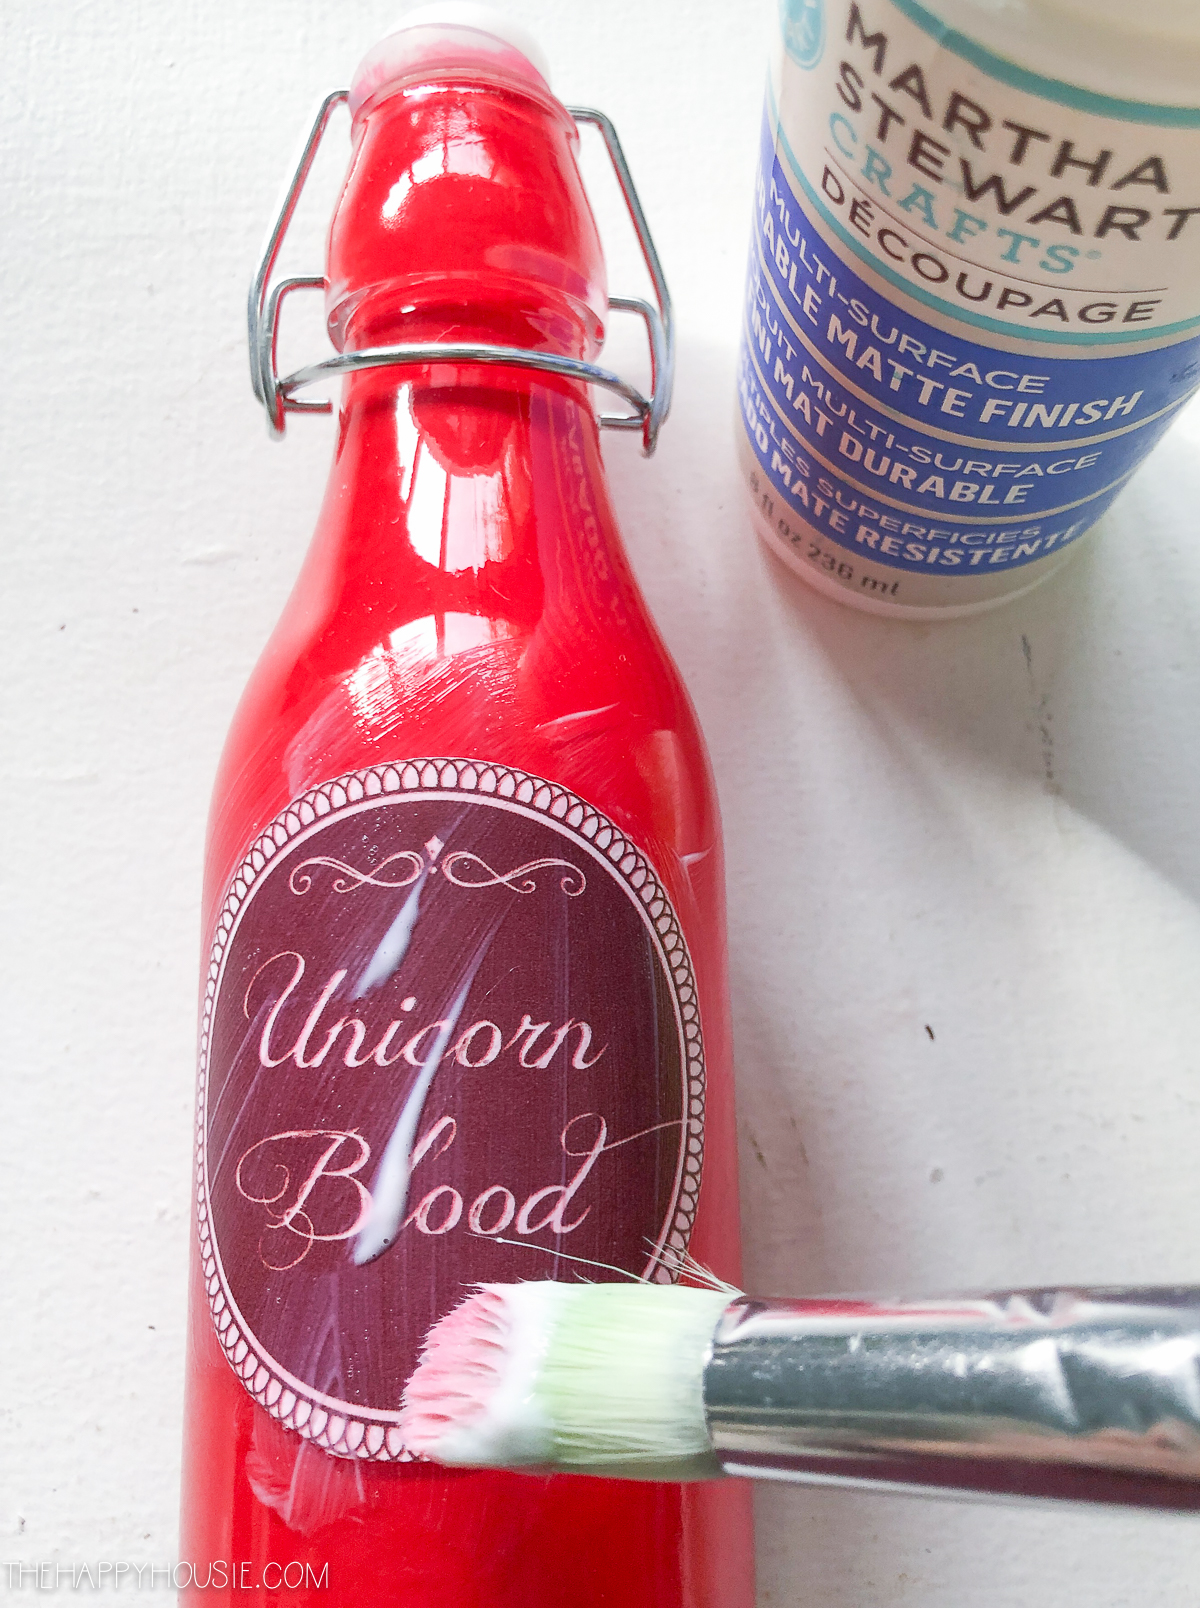 The label on the red paint that says Unicorn Blood.